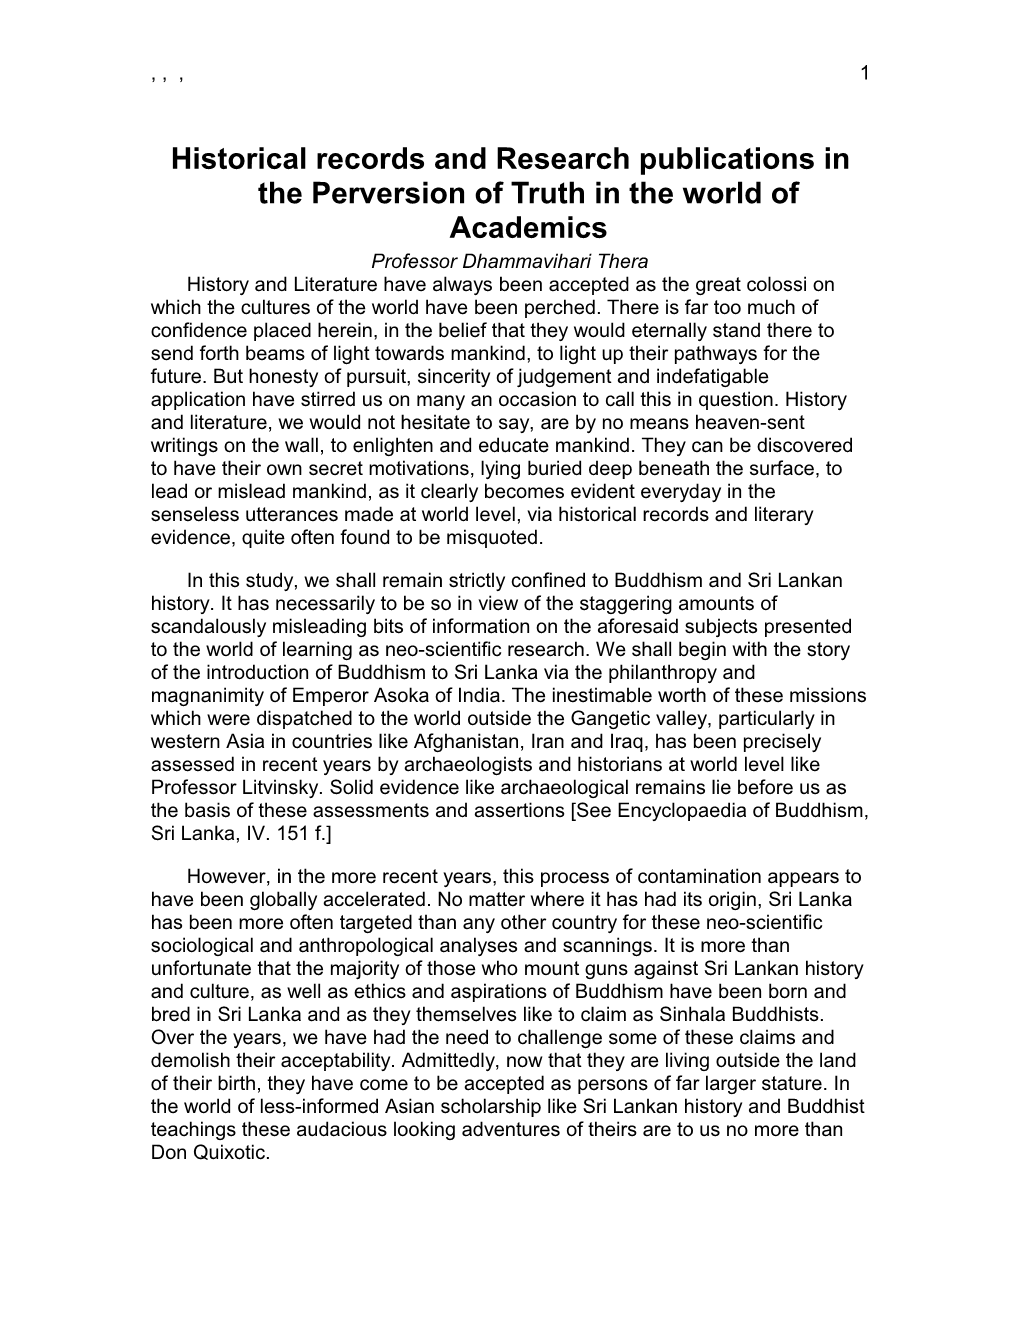 Historical Records and Research Publications in the Perversion of Truth in the World Of